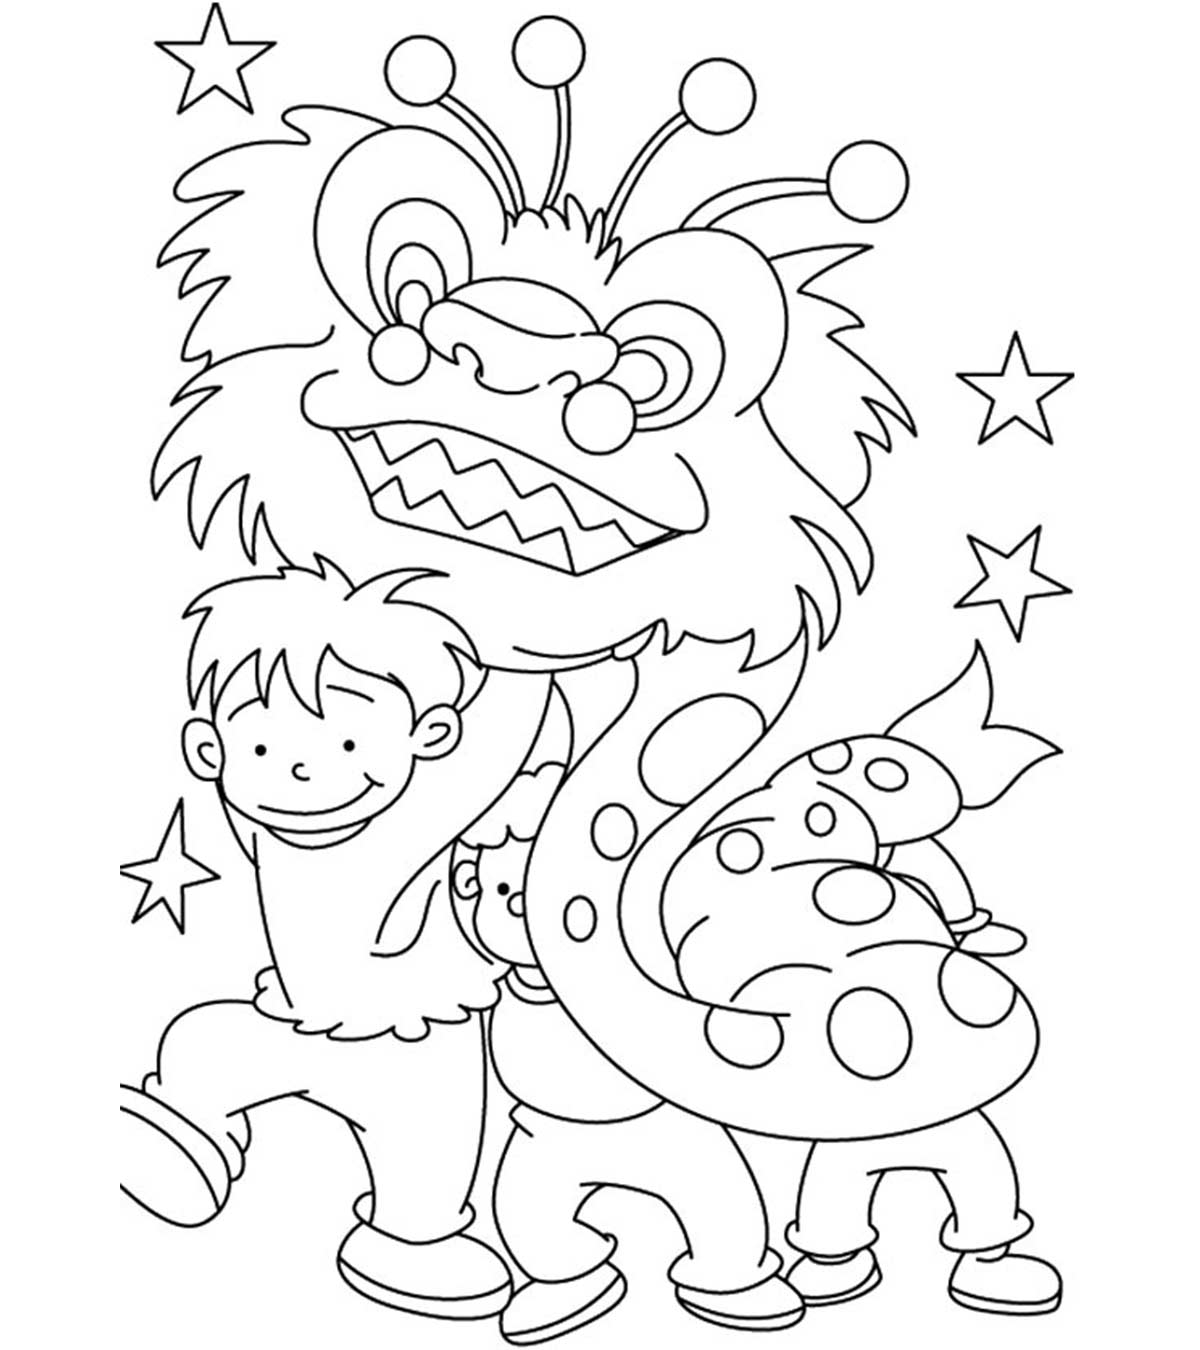 Coloring Book : Top Chinese New Year Coloring Pages For - Coloring Home